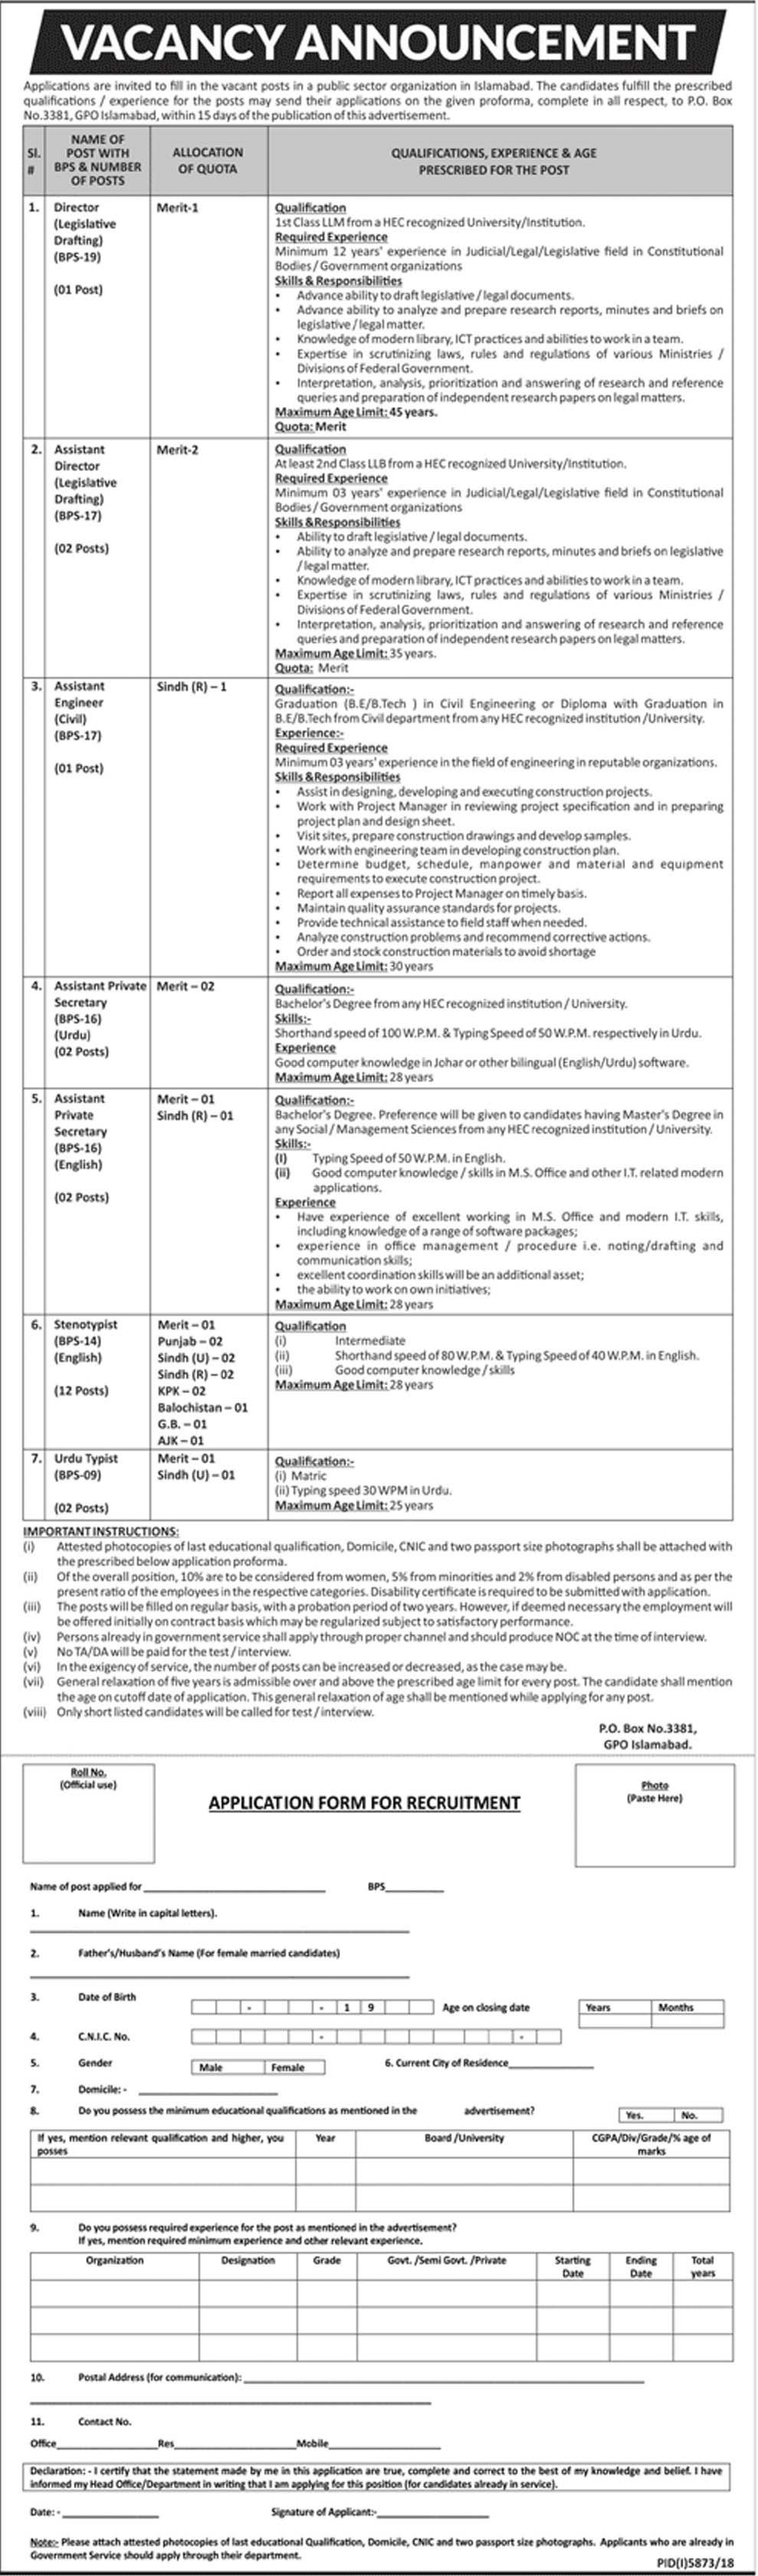 Get a Latest Jobs In Public Sector Organization 2019